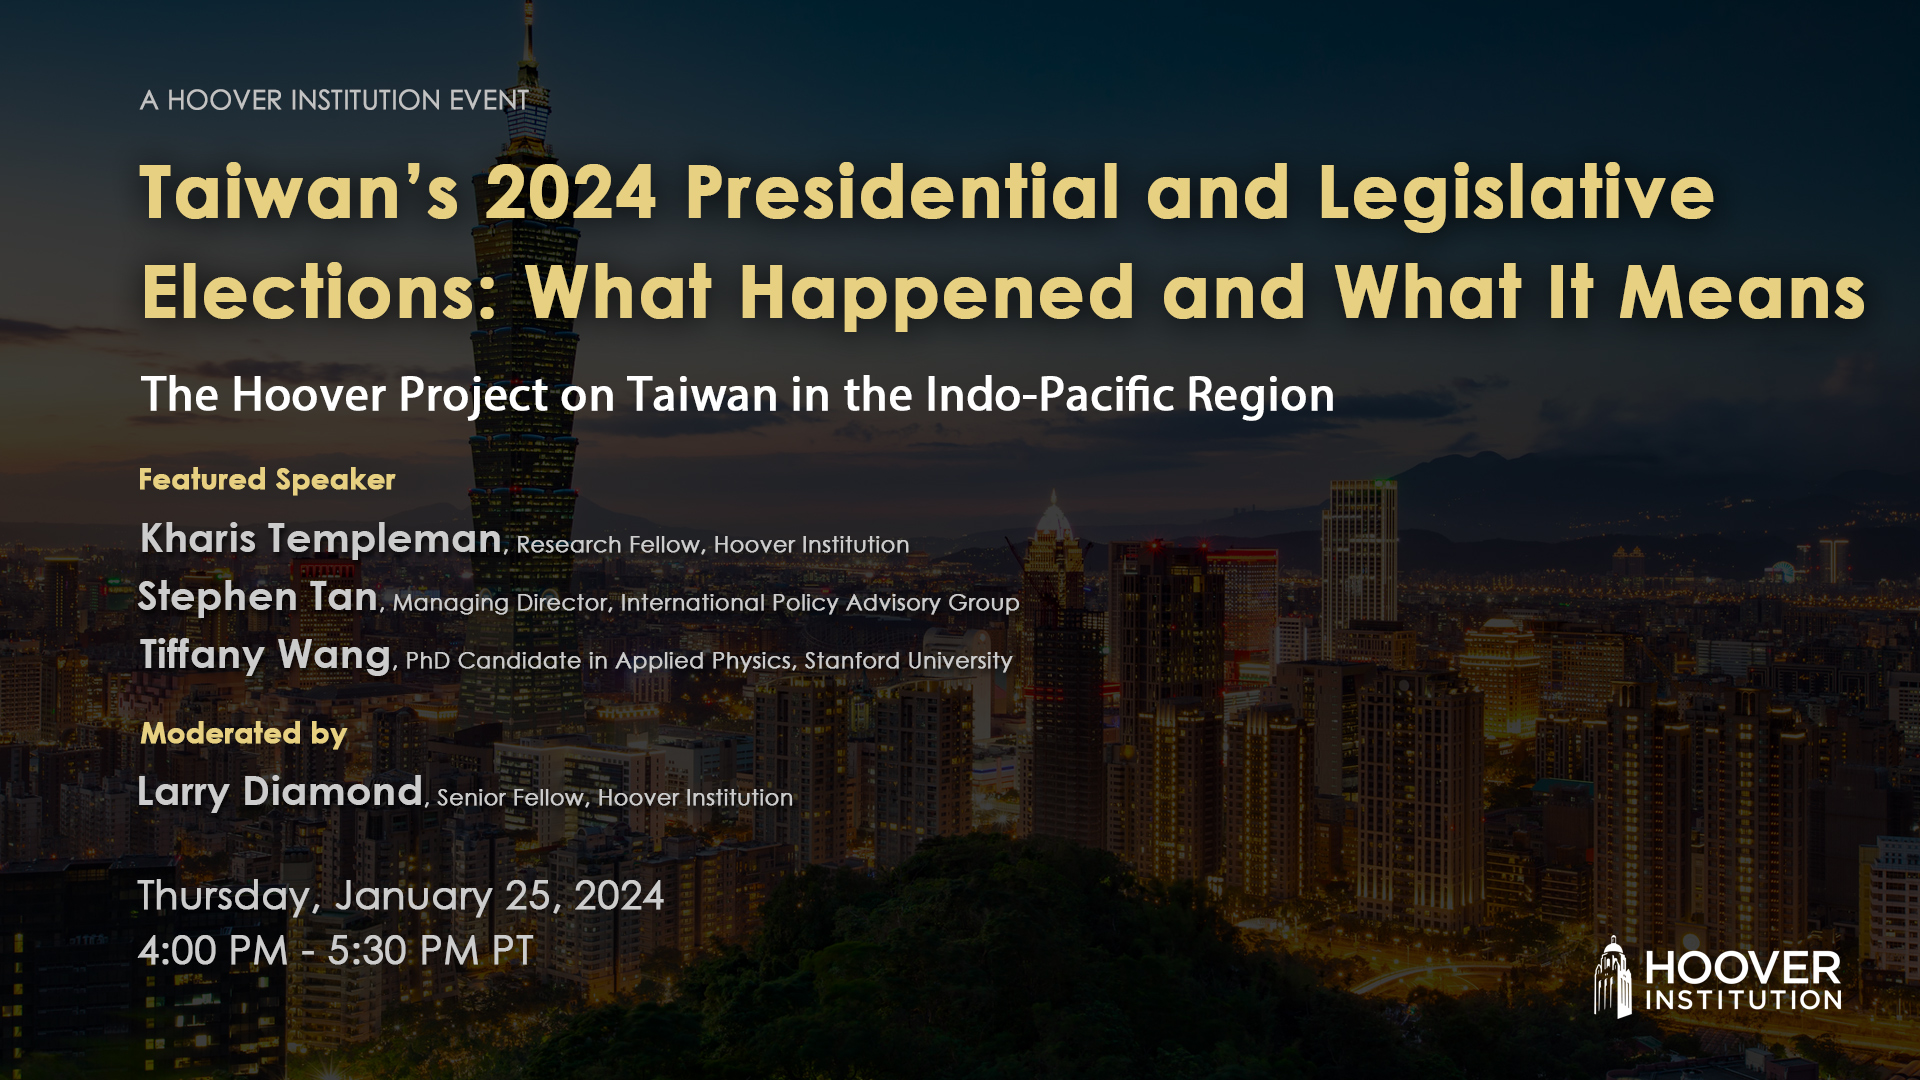 Taiwan’s 2024 Presidential and Legislative Elections: What Happened and What It Means